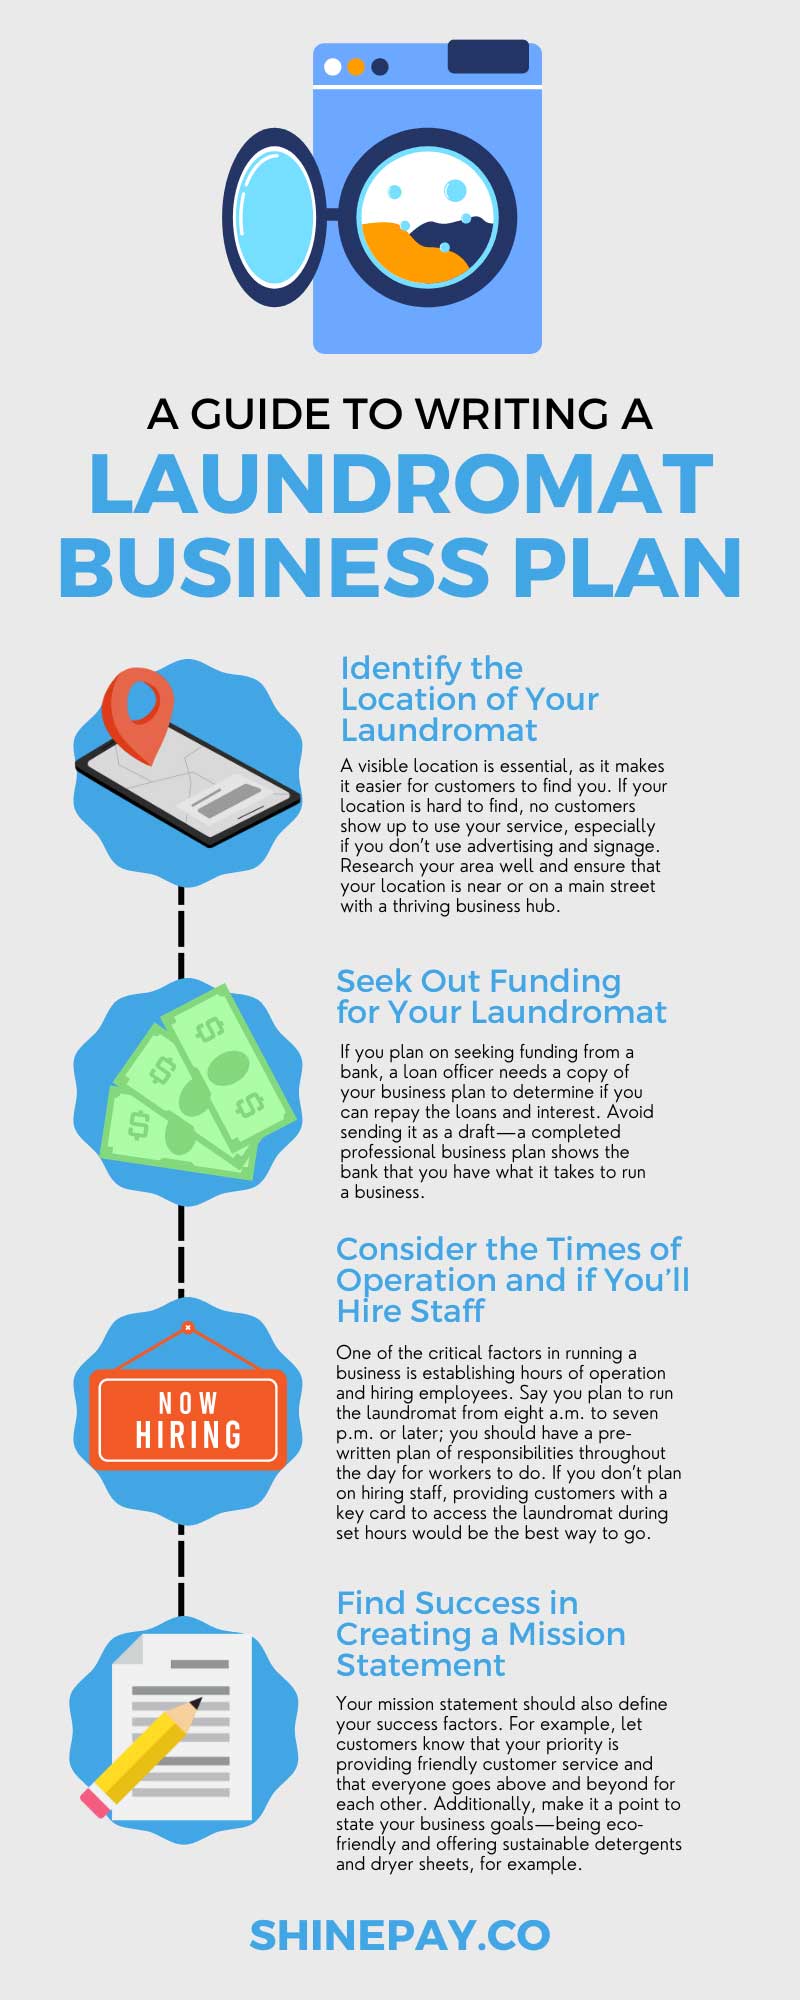 A Guide to Writing a Laundromat Business Plan